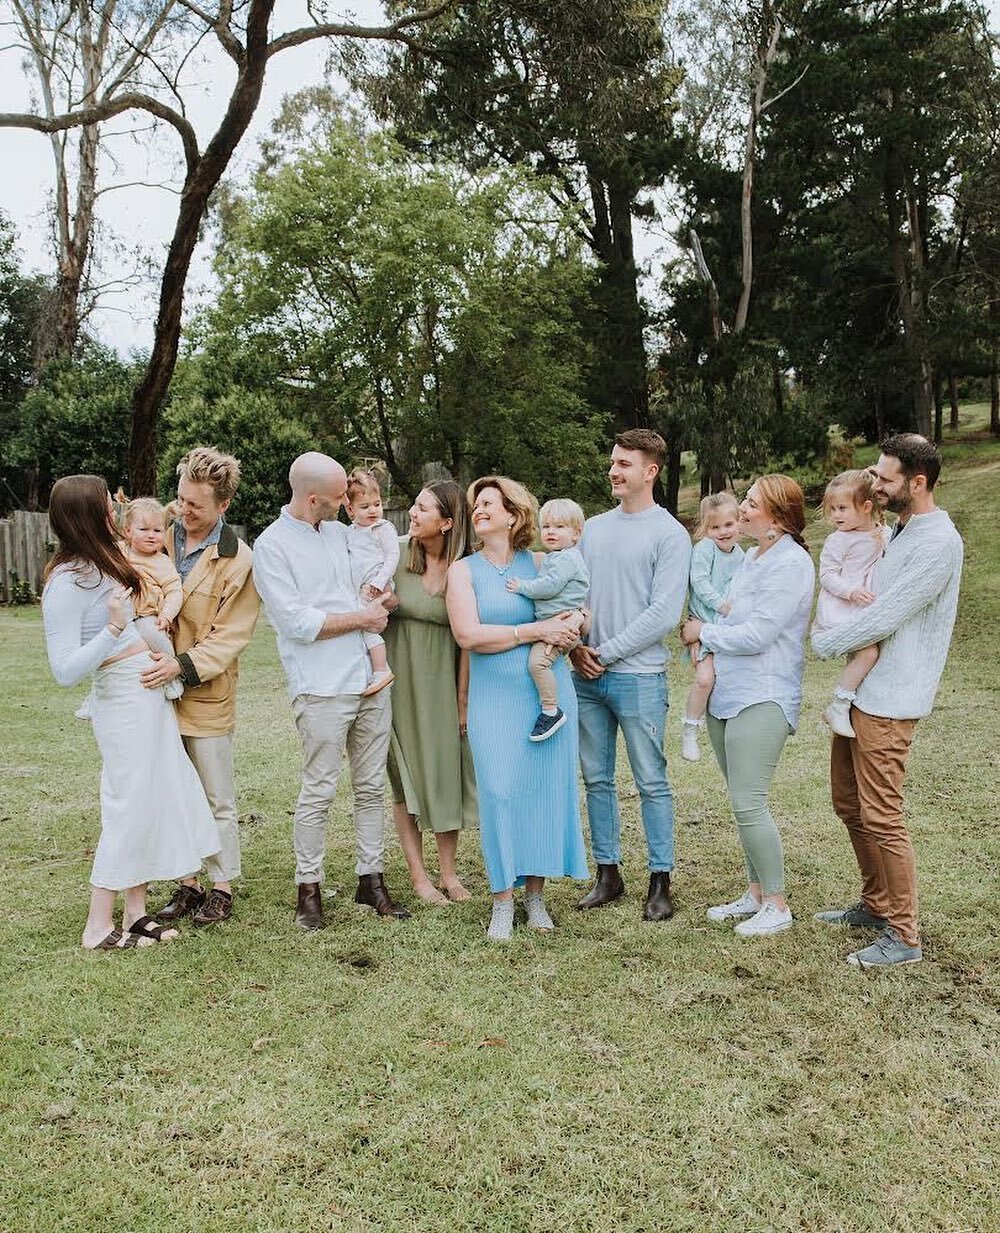 A sweet extended family shoot with this growing tribe ✨

#melbournephotographer #melbournephotography #melbournefamilyphotographer #melbournefamilyphotography #melbournefamilies #melbournefamilyphotos #photography #families #cannonphotography #cannon